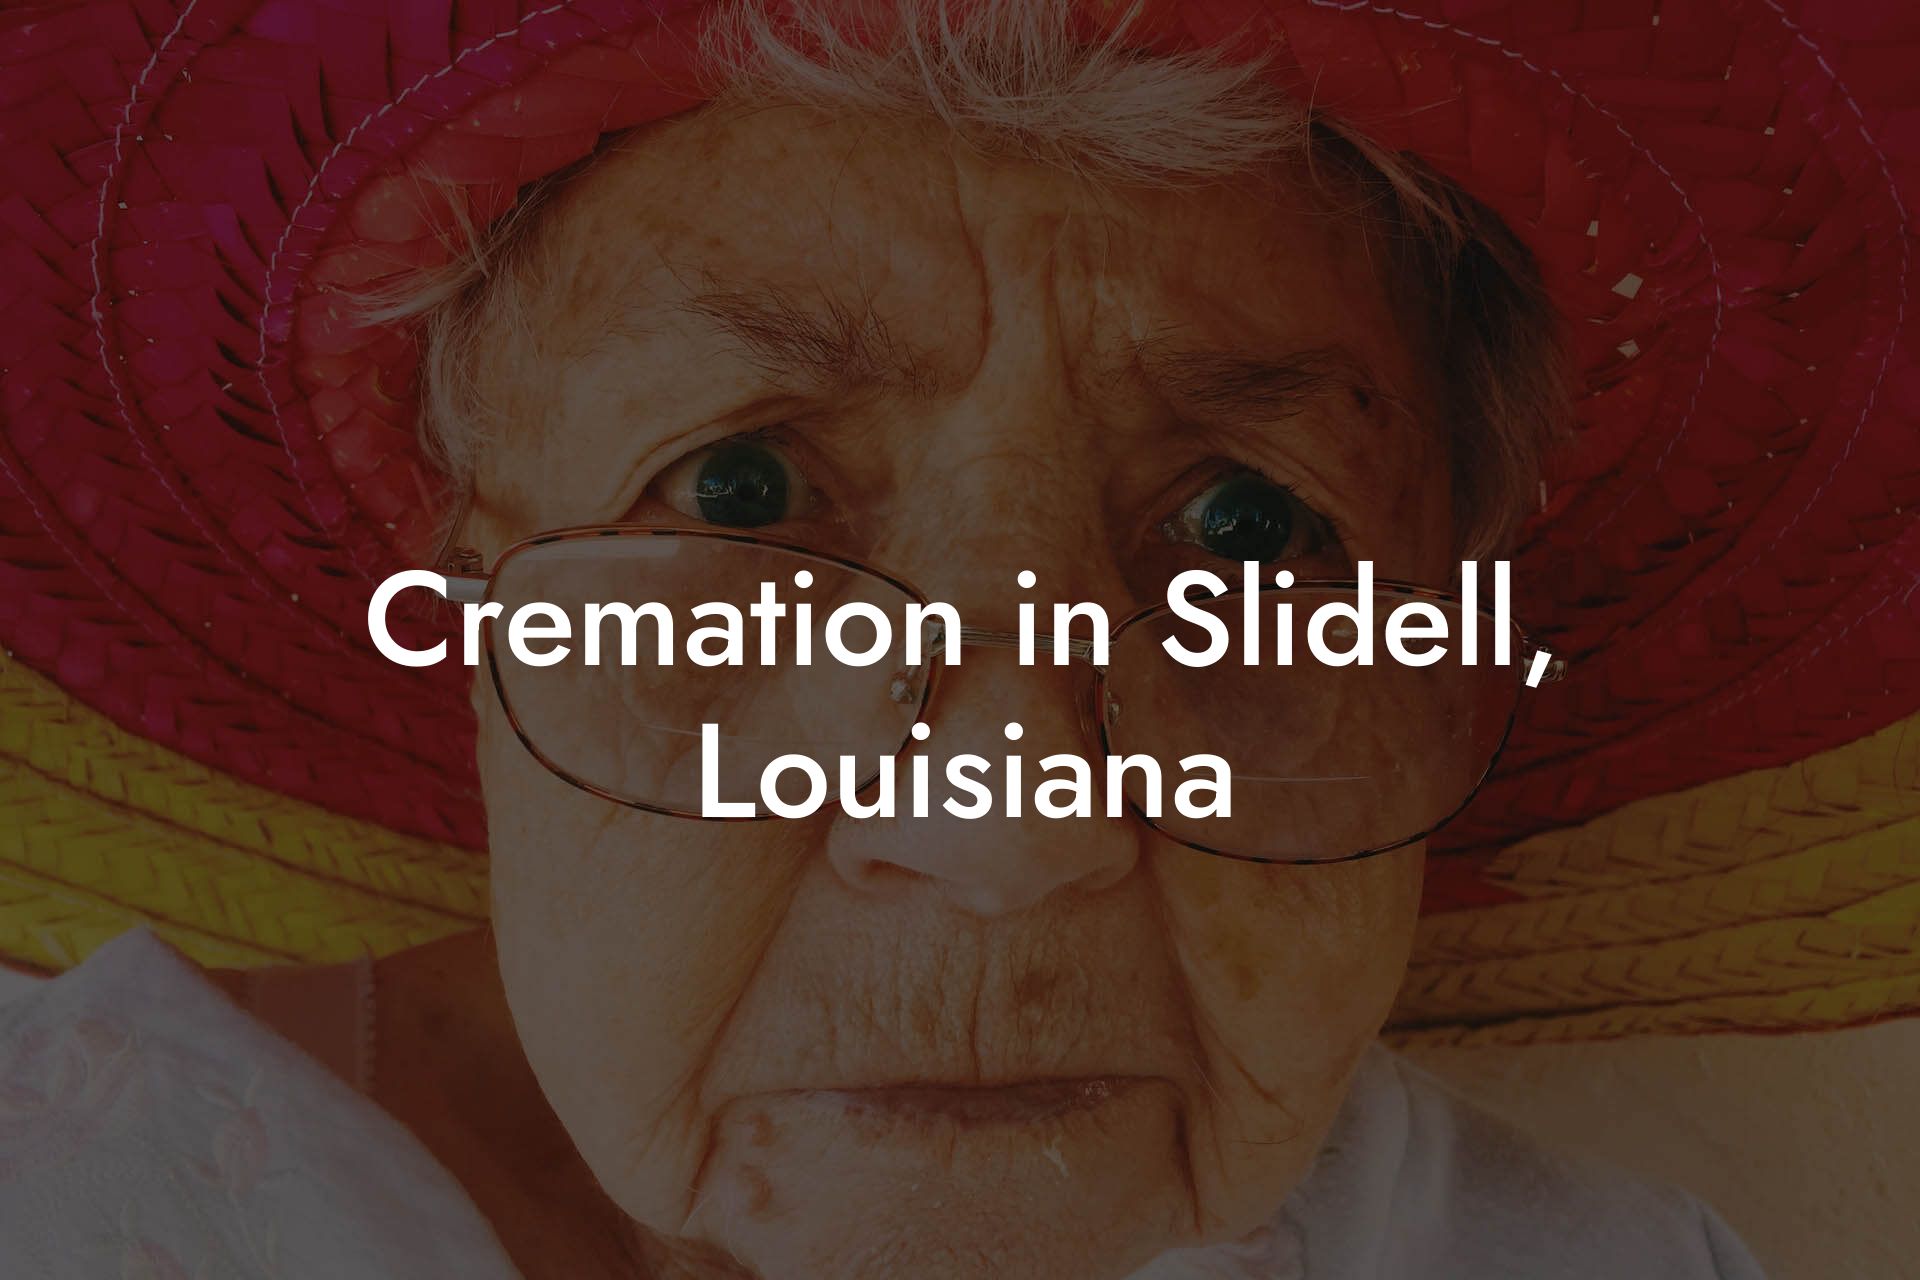 Cremation in Slidell, Louisiana